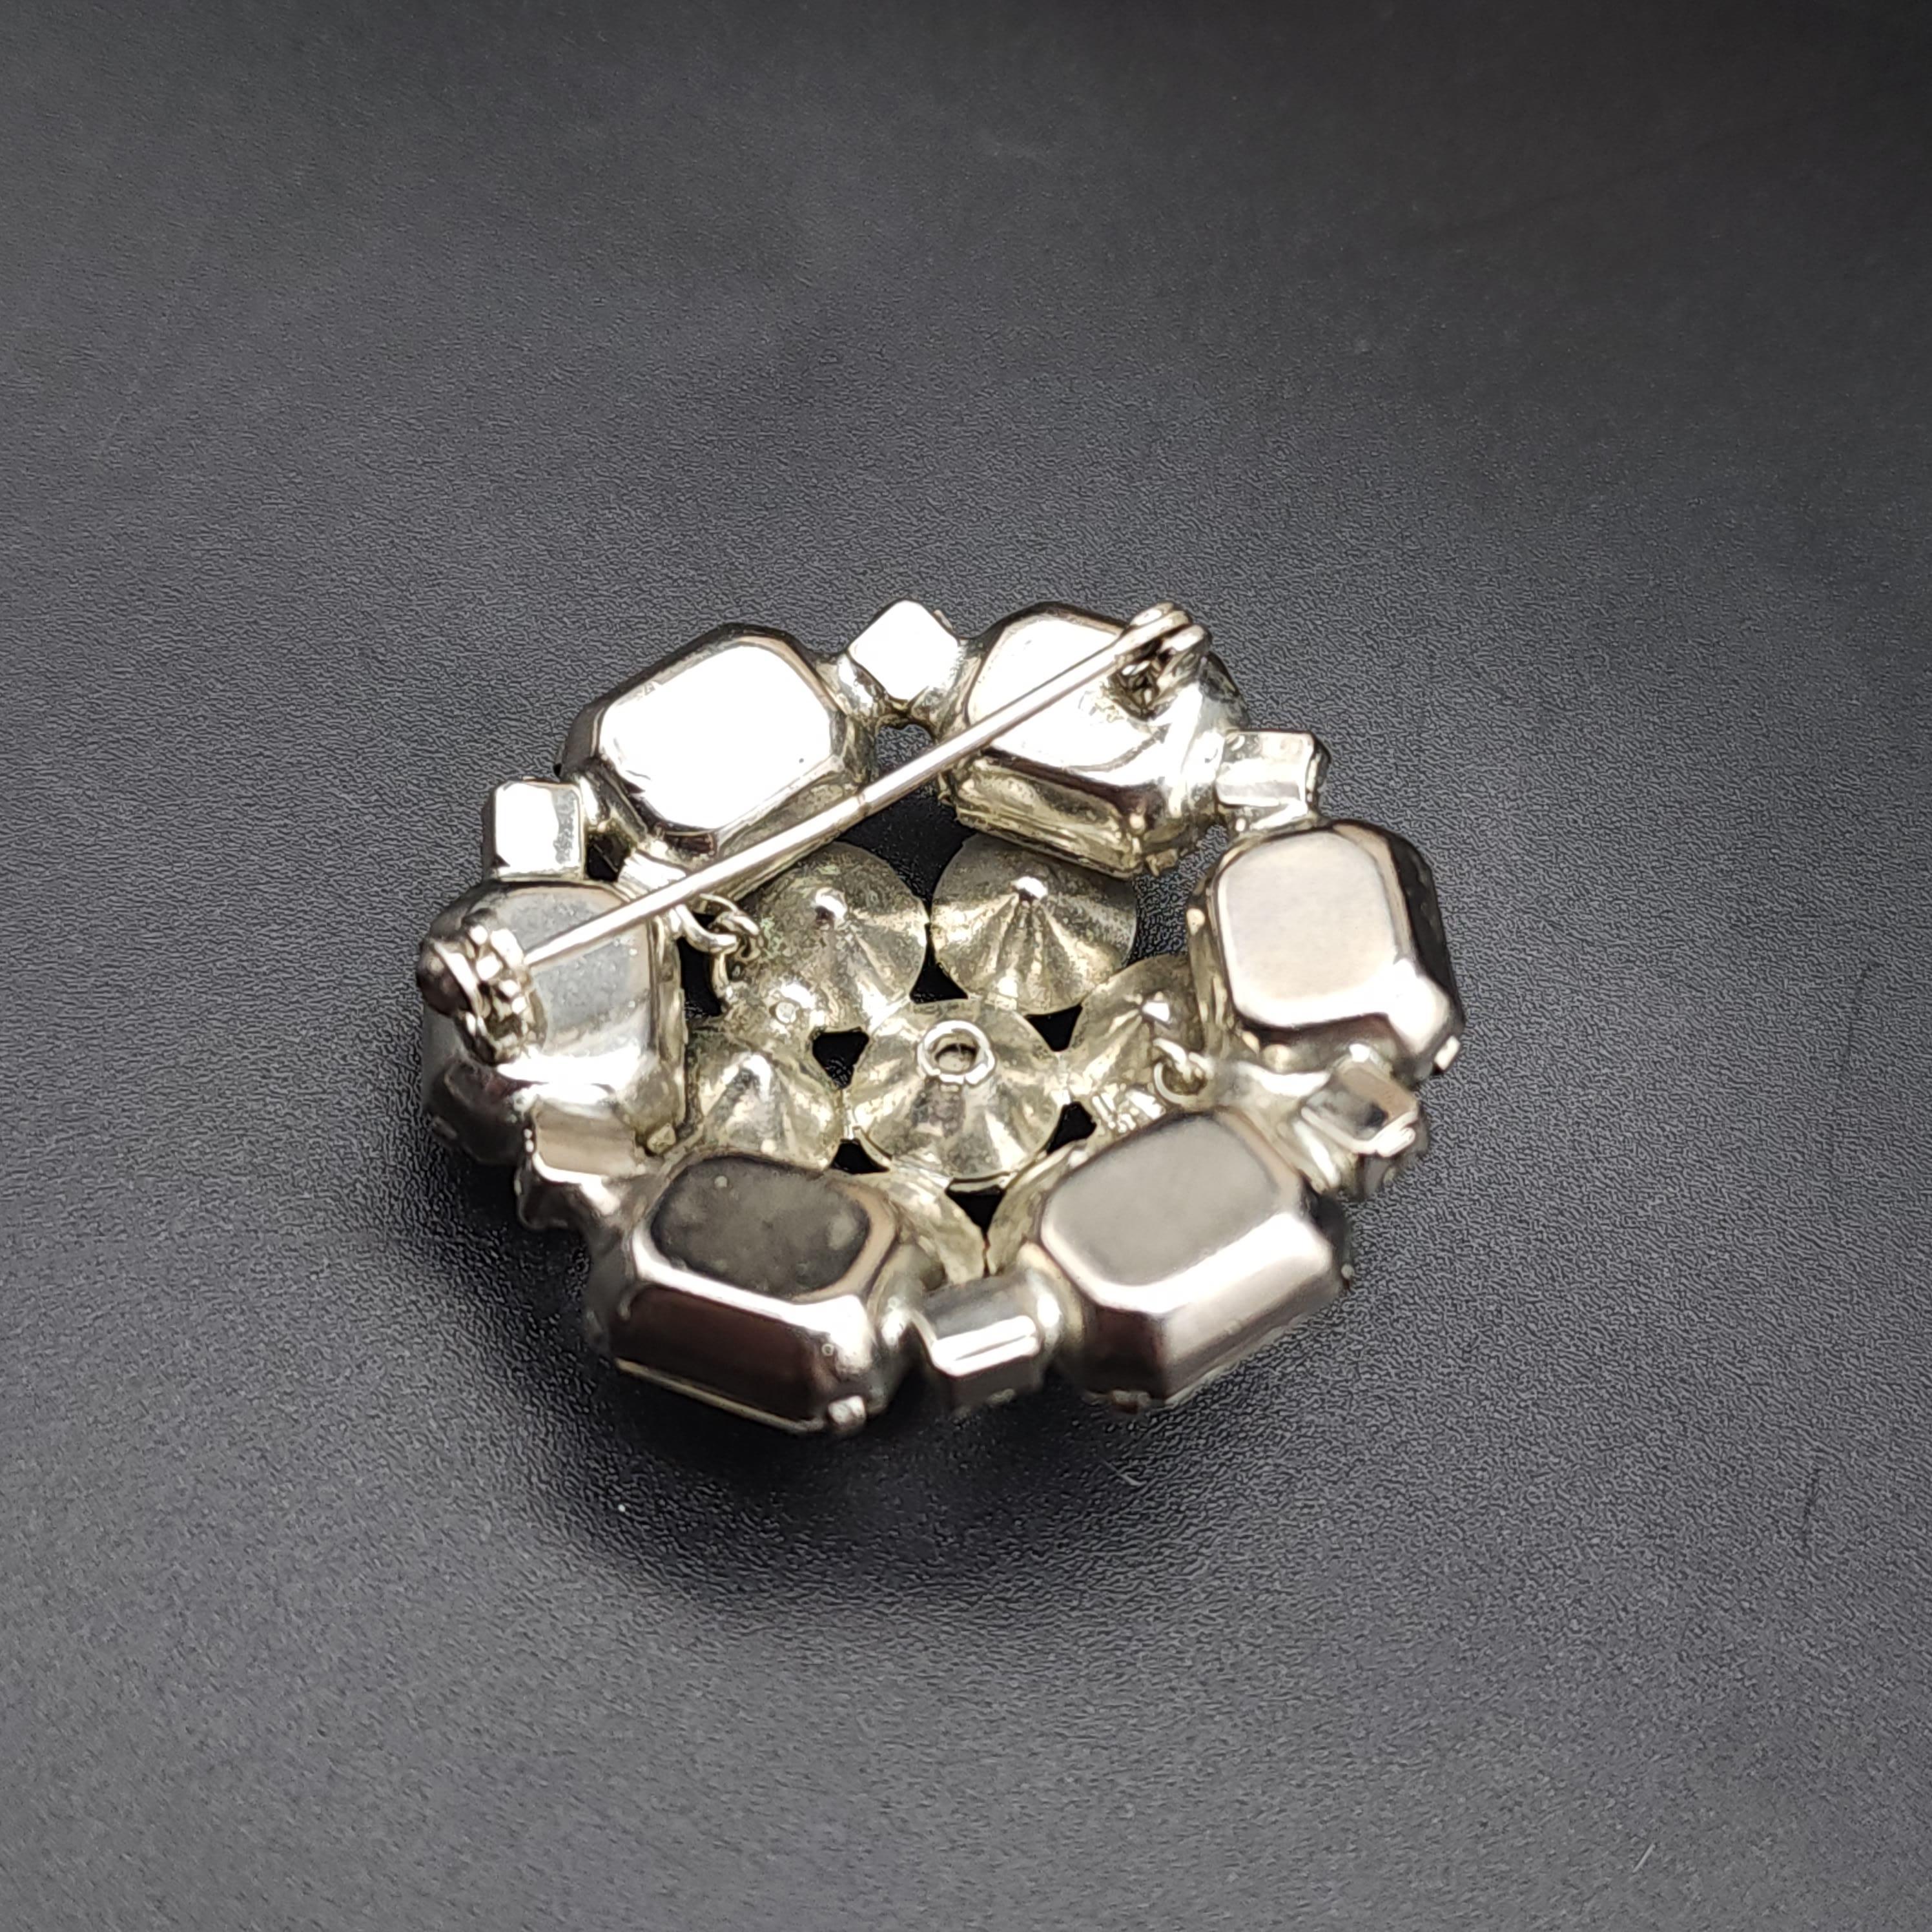 70s Art Deco Round Crystal Pin, Vintage Silver-Tone Brooch, Prong Set, Clear For Sale 1